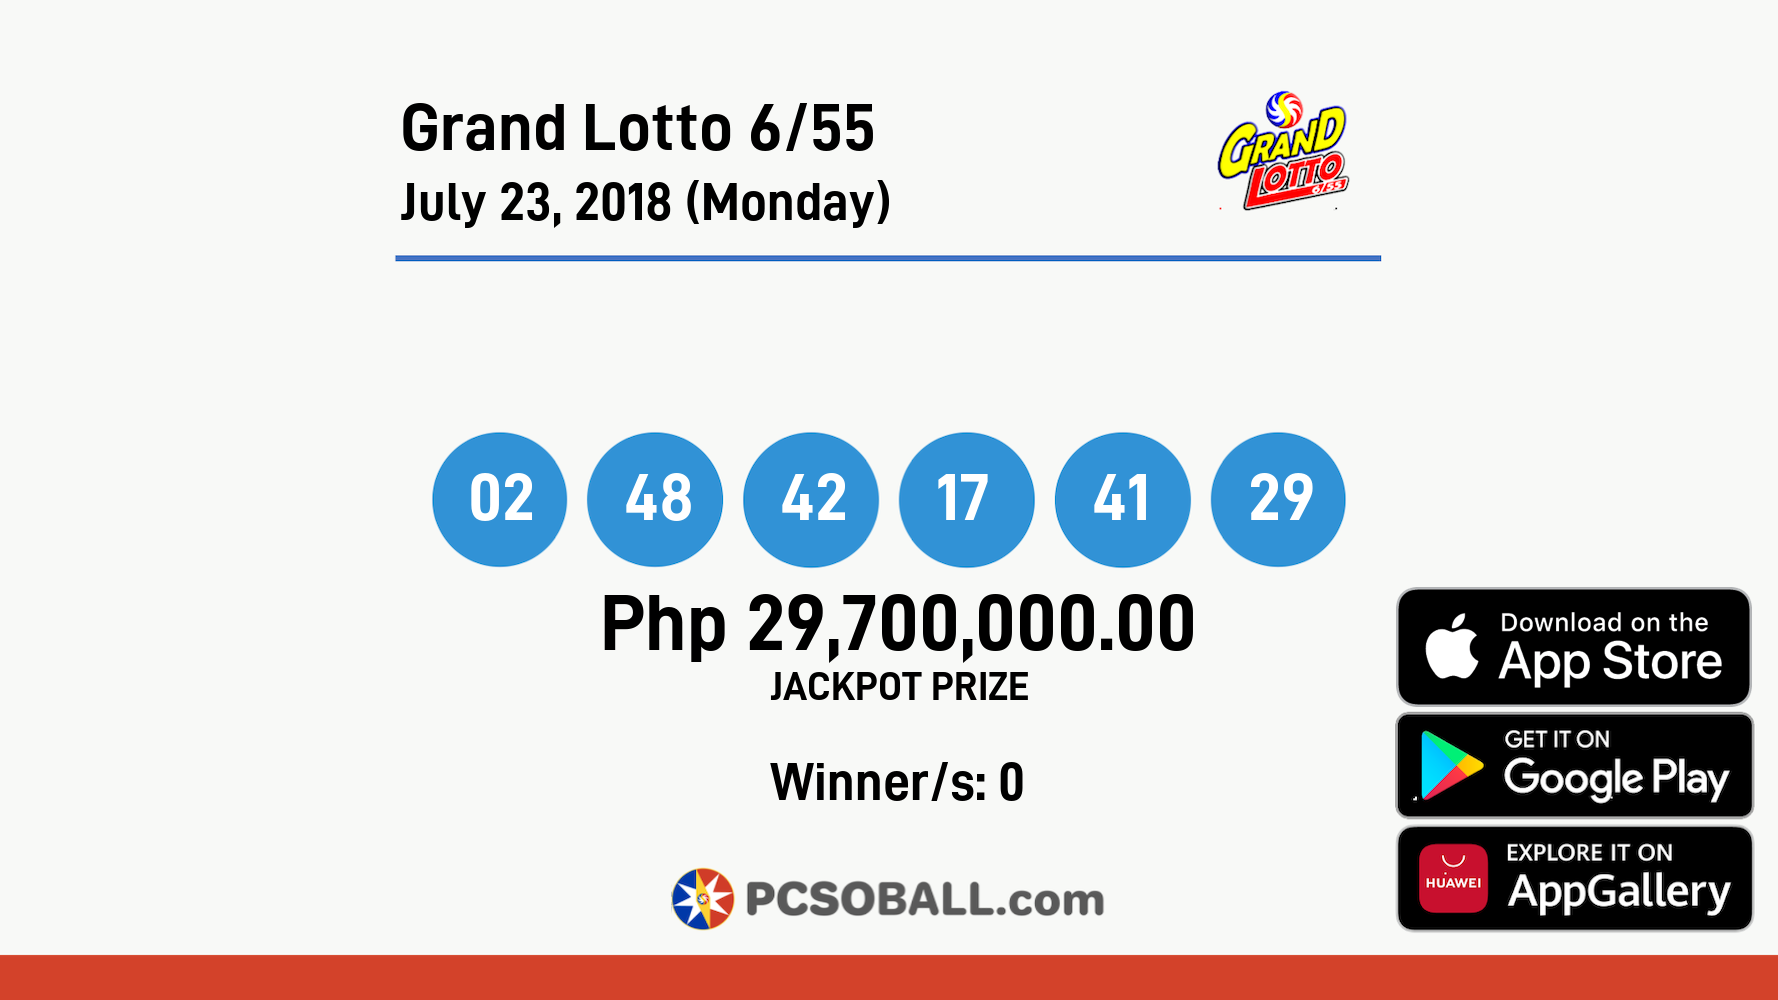 Grand Lotto 6/55 July 23, 2018 (Monday) Result